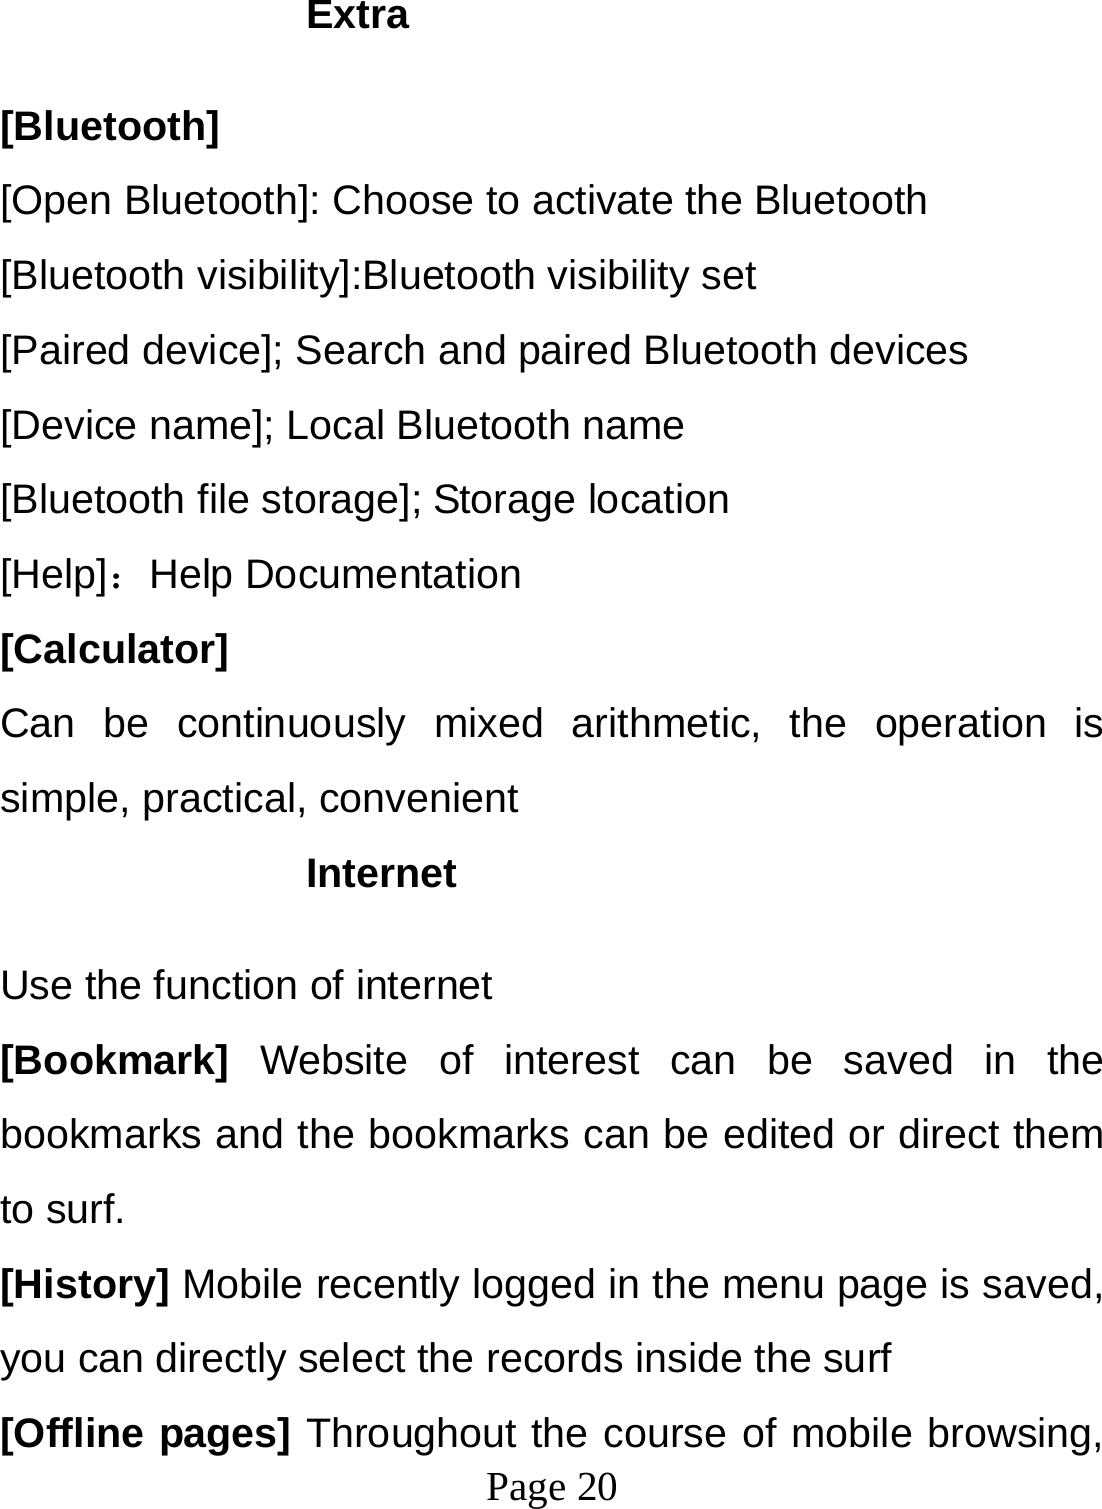  Page 20  Extra  [Bluetooth] [Open Bluetooth]: Choose to activate the Bluetooth [Bluetooth visibility]:Bluetooth visibility set [Paired device]; Search and paired Bluetooth devices [Device name]; Local Bluetooth name [Bluetooth file storage]; Storage location [Help]：Help Documentation [Calculator] Can be continuously mixed arithmetic, the operation is simple, practical, convenient Internet  Use the function of internet [Bookmark] Website of interest can be saved in the bookmarks and the bookmarks can be edited or direct them to surf. [History] Mobile recently logged in the menu page is saved, you can directly select the records inside the surf [Offline pages] Throughout the course of mobile browsing, 